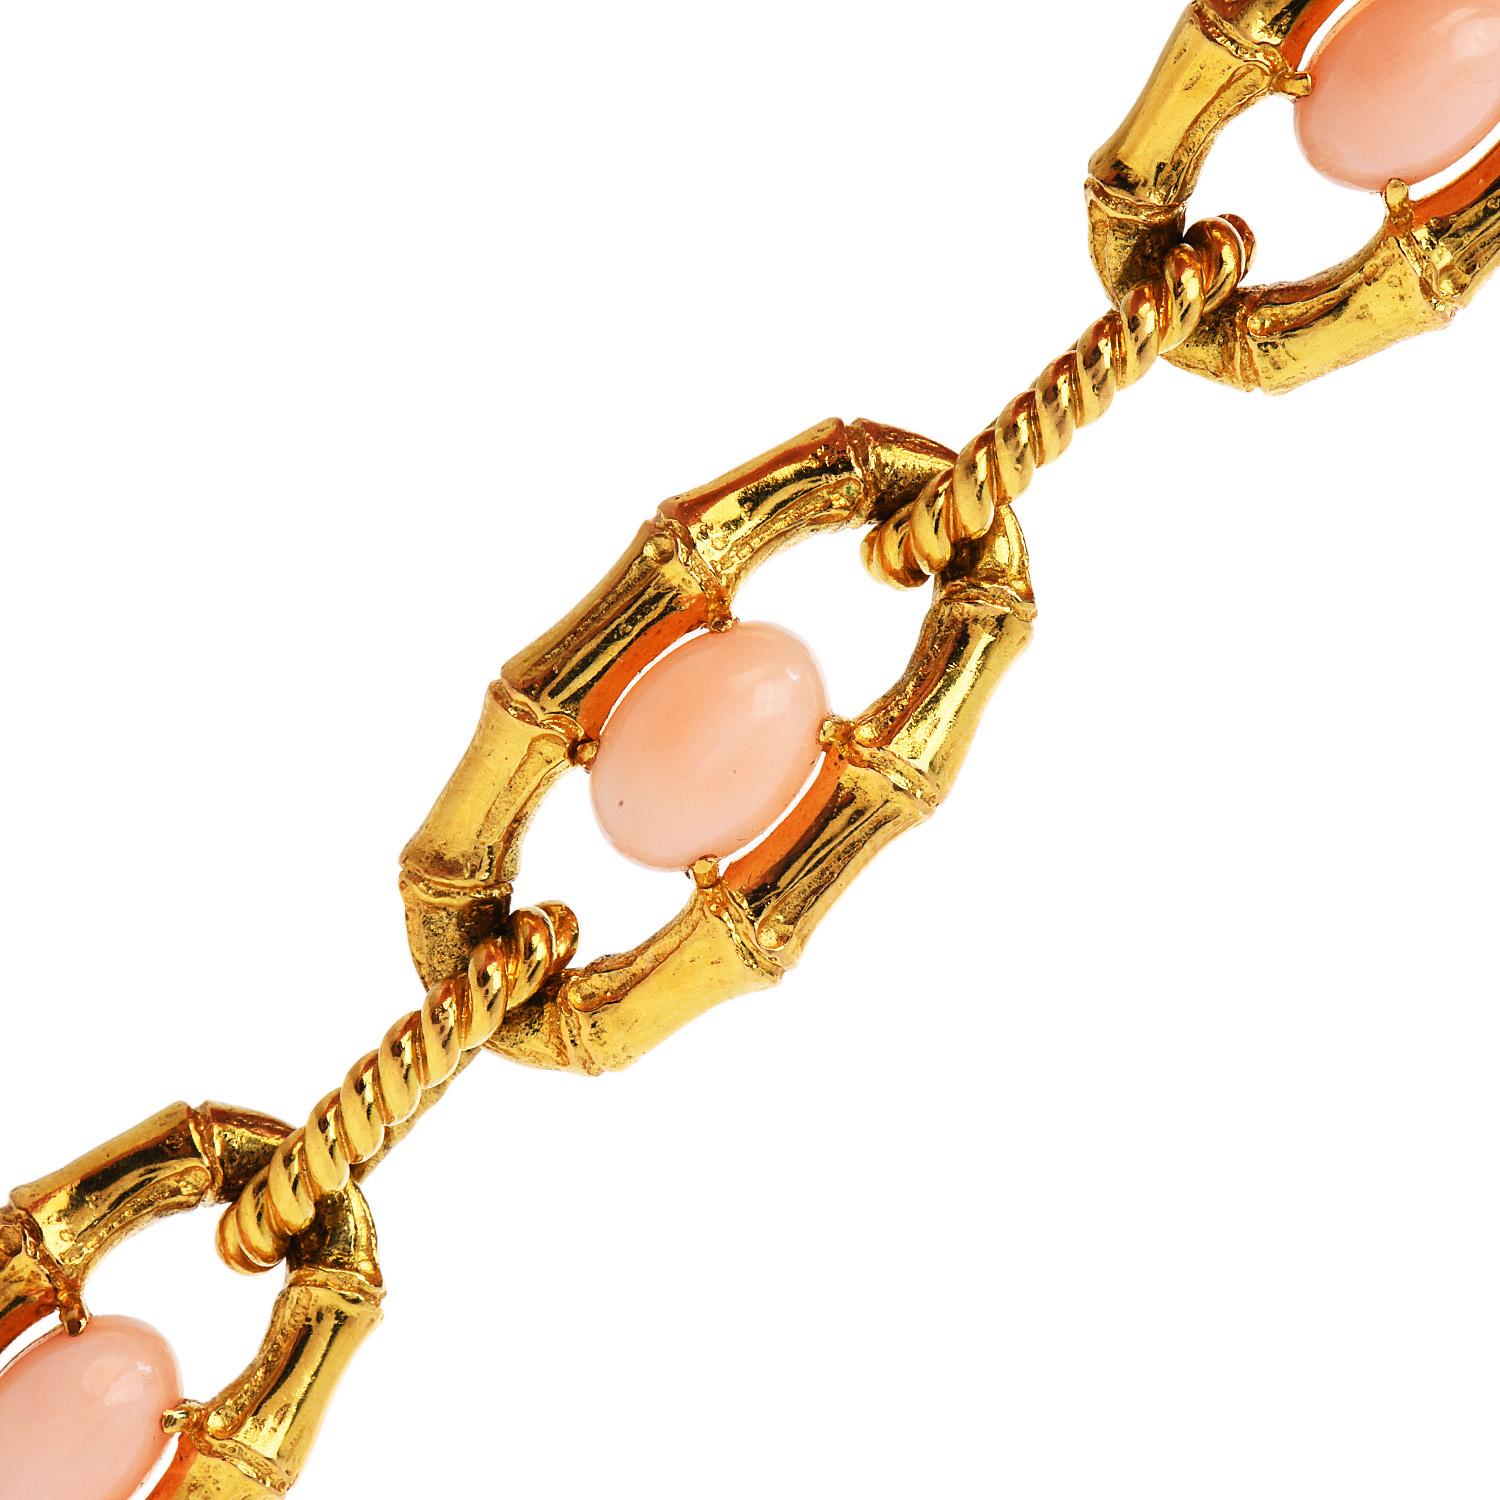 Elegant and unique, this is a high-quality link bracelet, made in France.

Exquisite textured with bamboo & rope link design, this vintage 1970s pink coral piece is crafted in solid 18K yellow gold.

Centered by 5 cabochons oval cut genuine pink